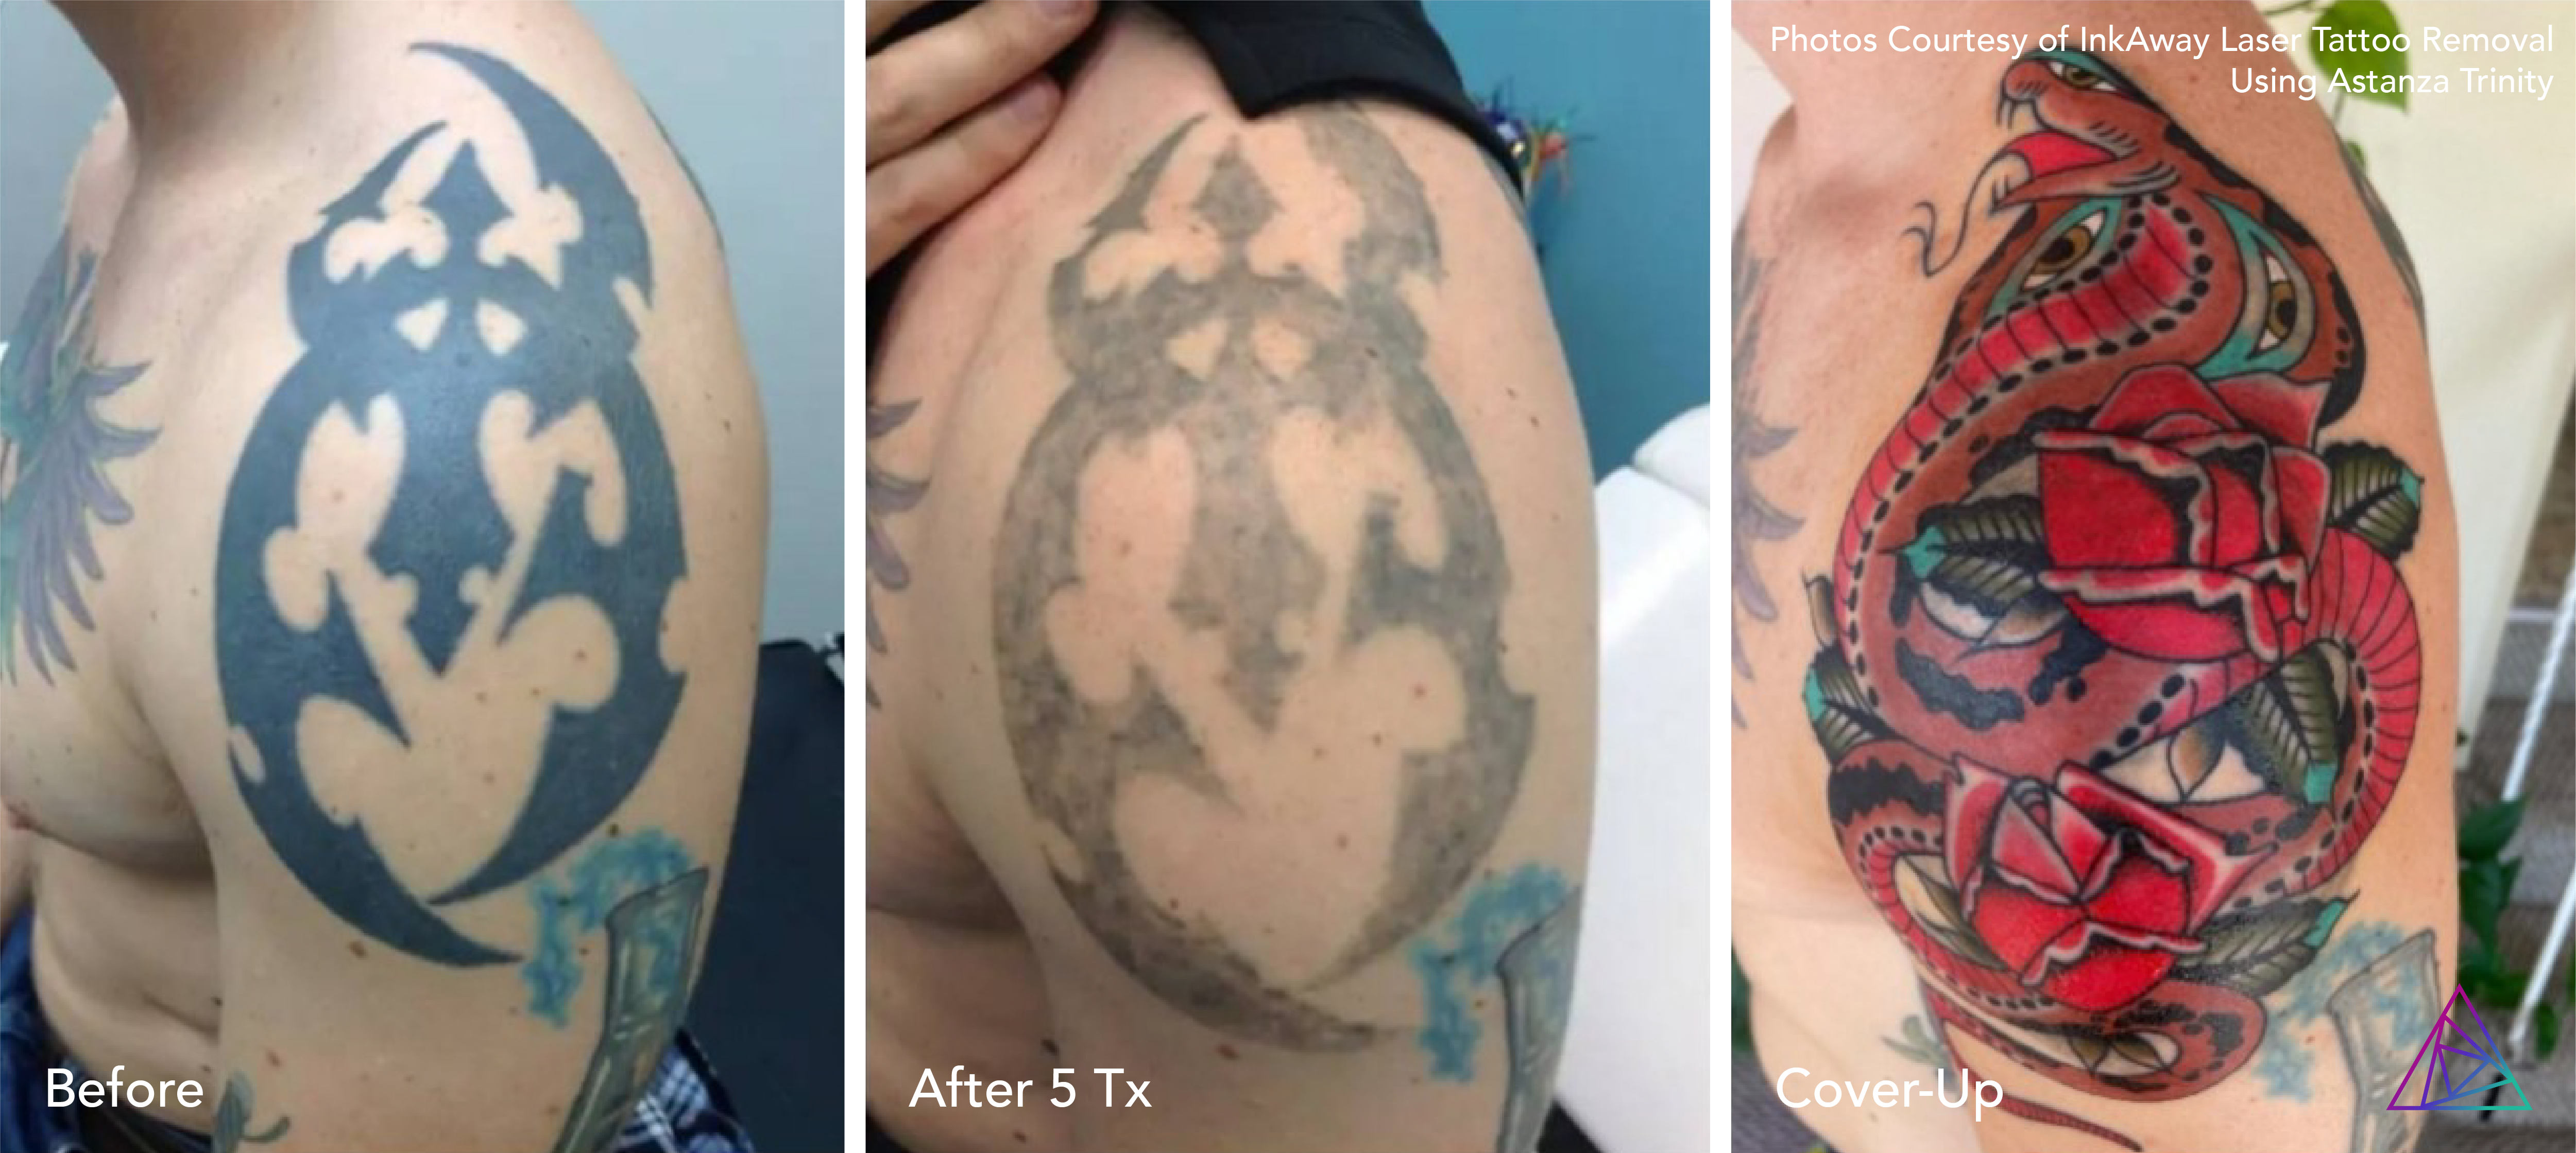 Laser Tattoo Removal Training Course  Laser Training Center of Miami  Florida